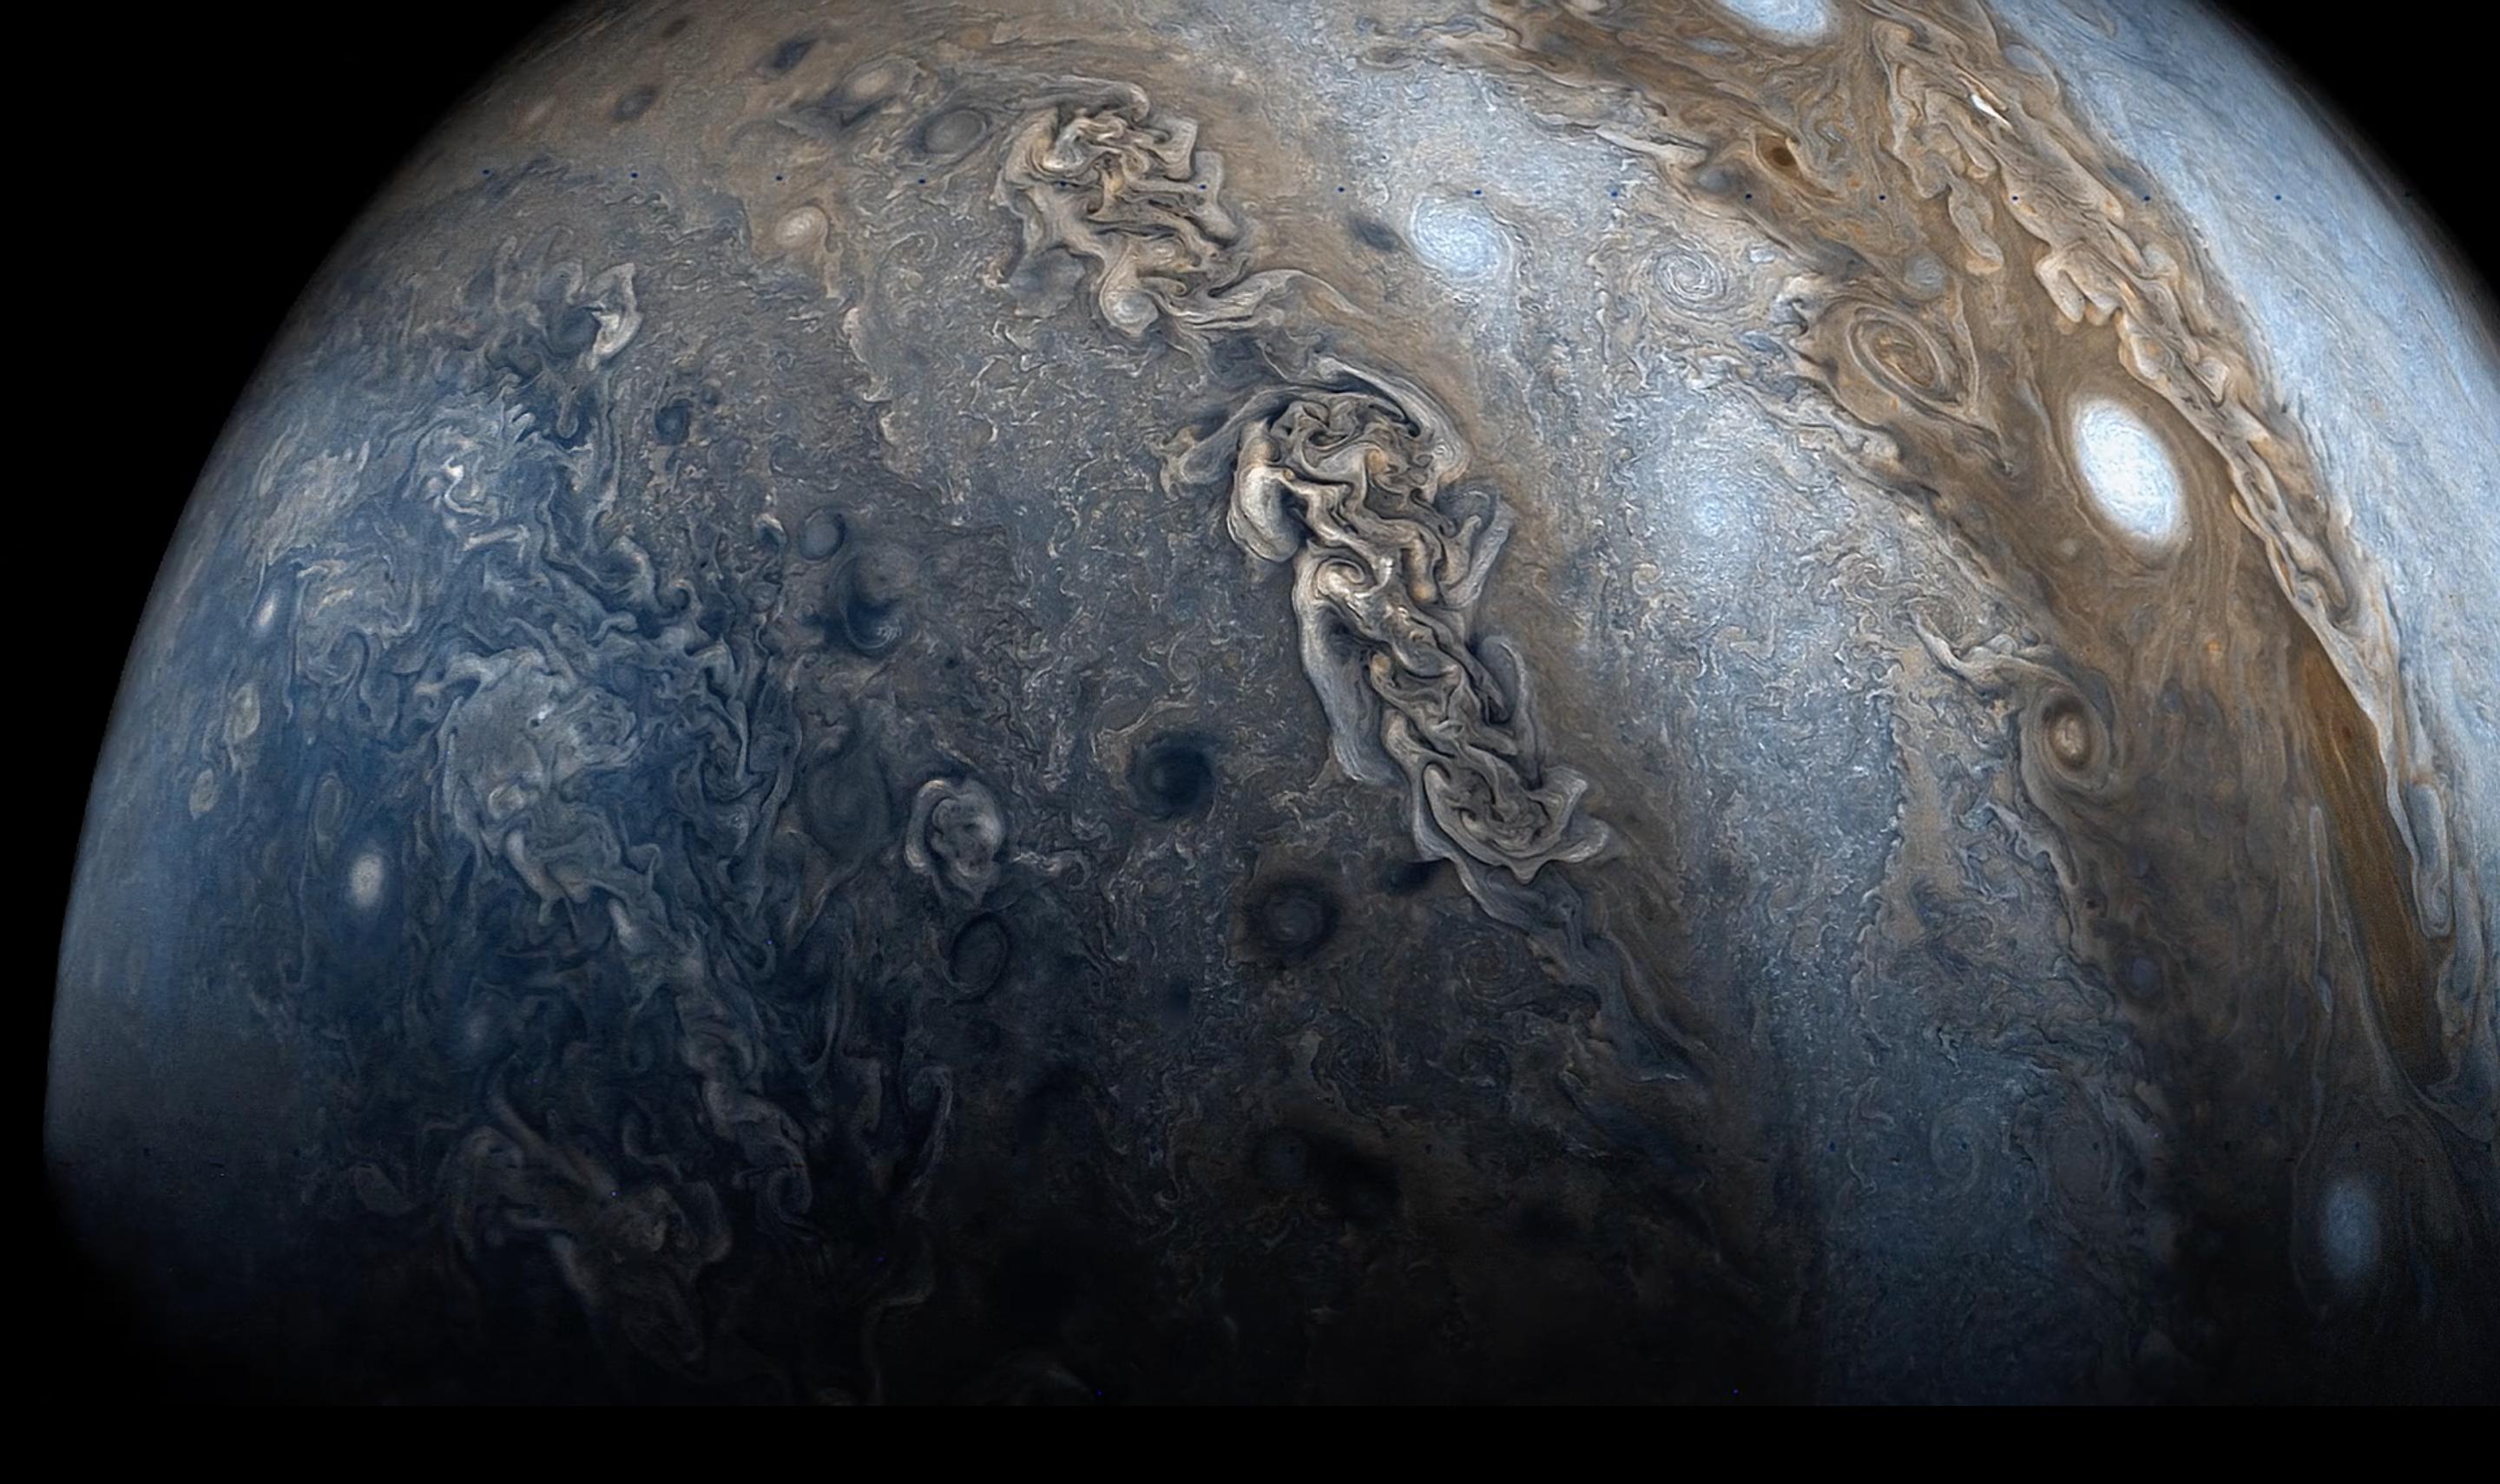 General 2880x1710 Jupiter space planet Solar System storm Juno Space Mission